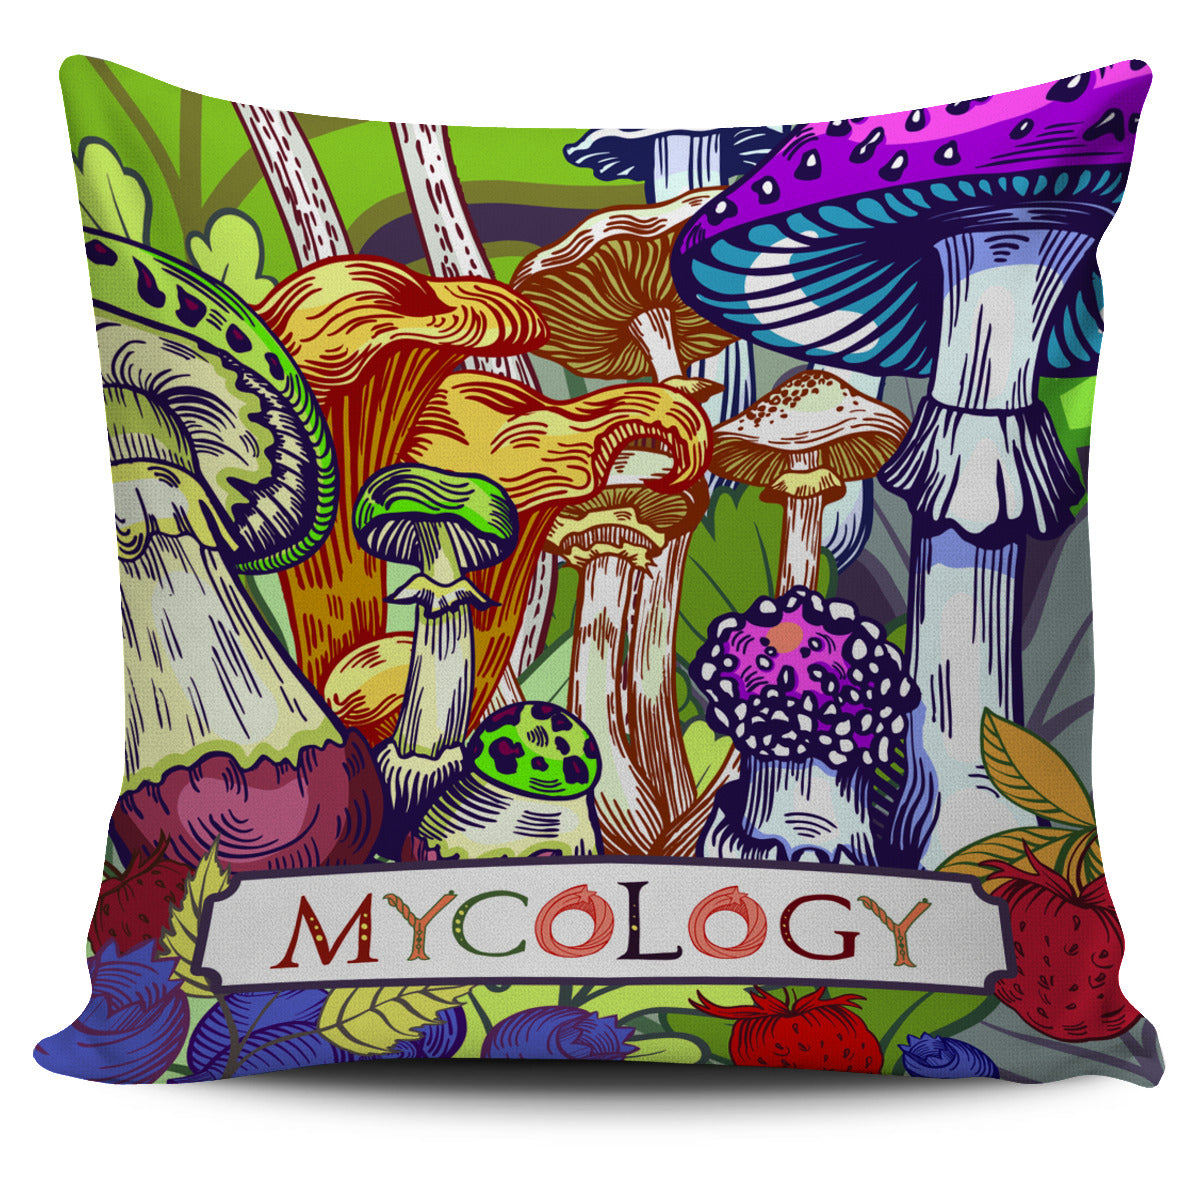 Colorful Mycology Pillow Case